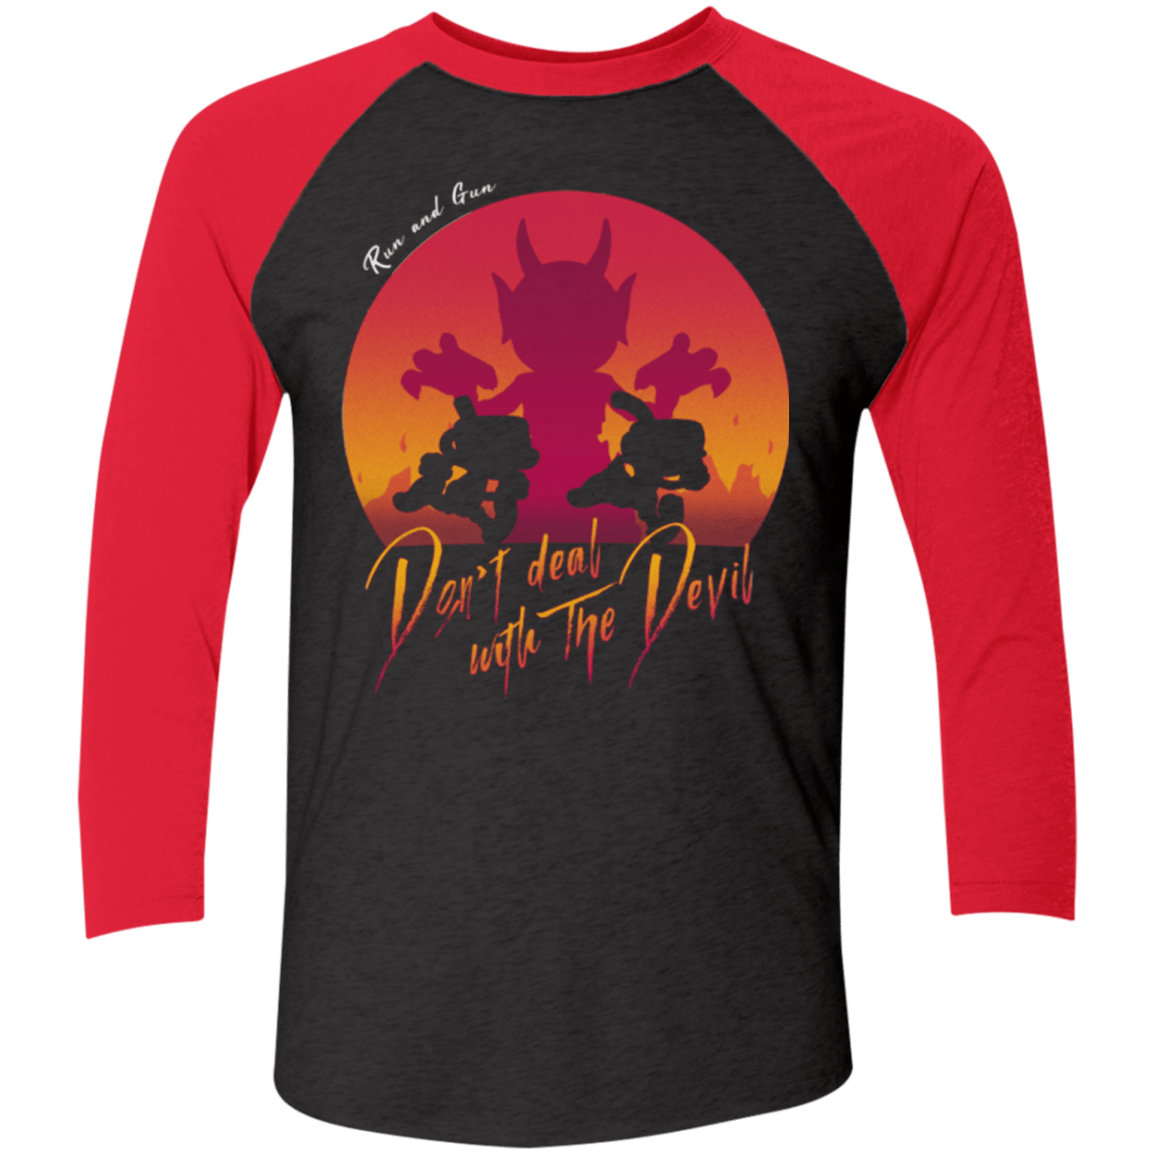 T-Shirts Vintage Black/Vintage Red / X-Small Don't deal with the Devil Men's Triblend 3/4 Sleeve